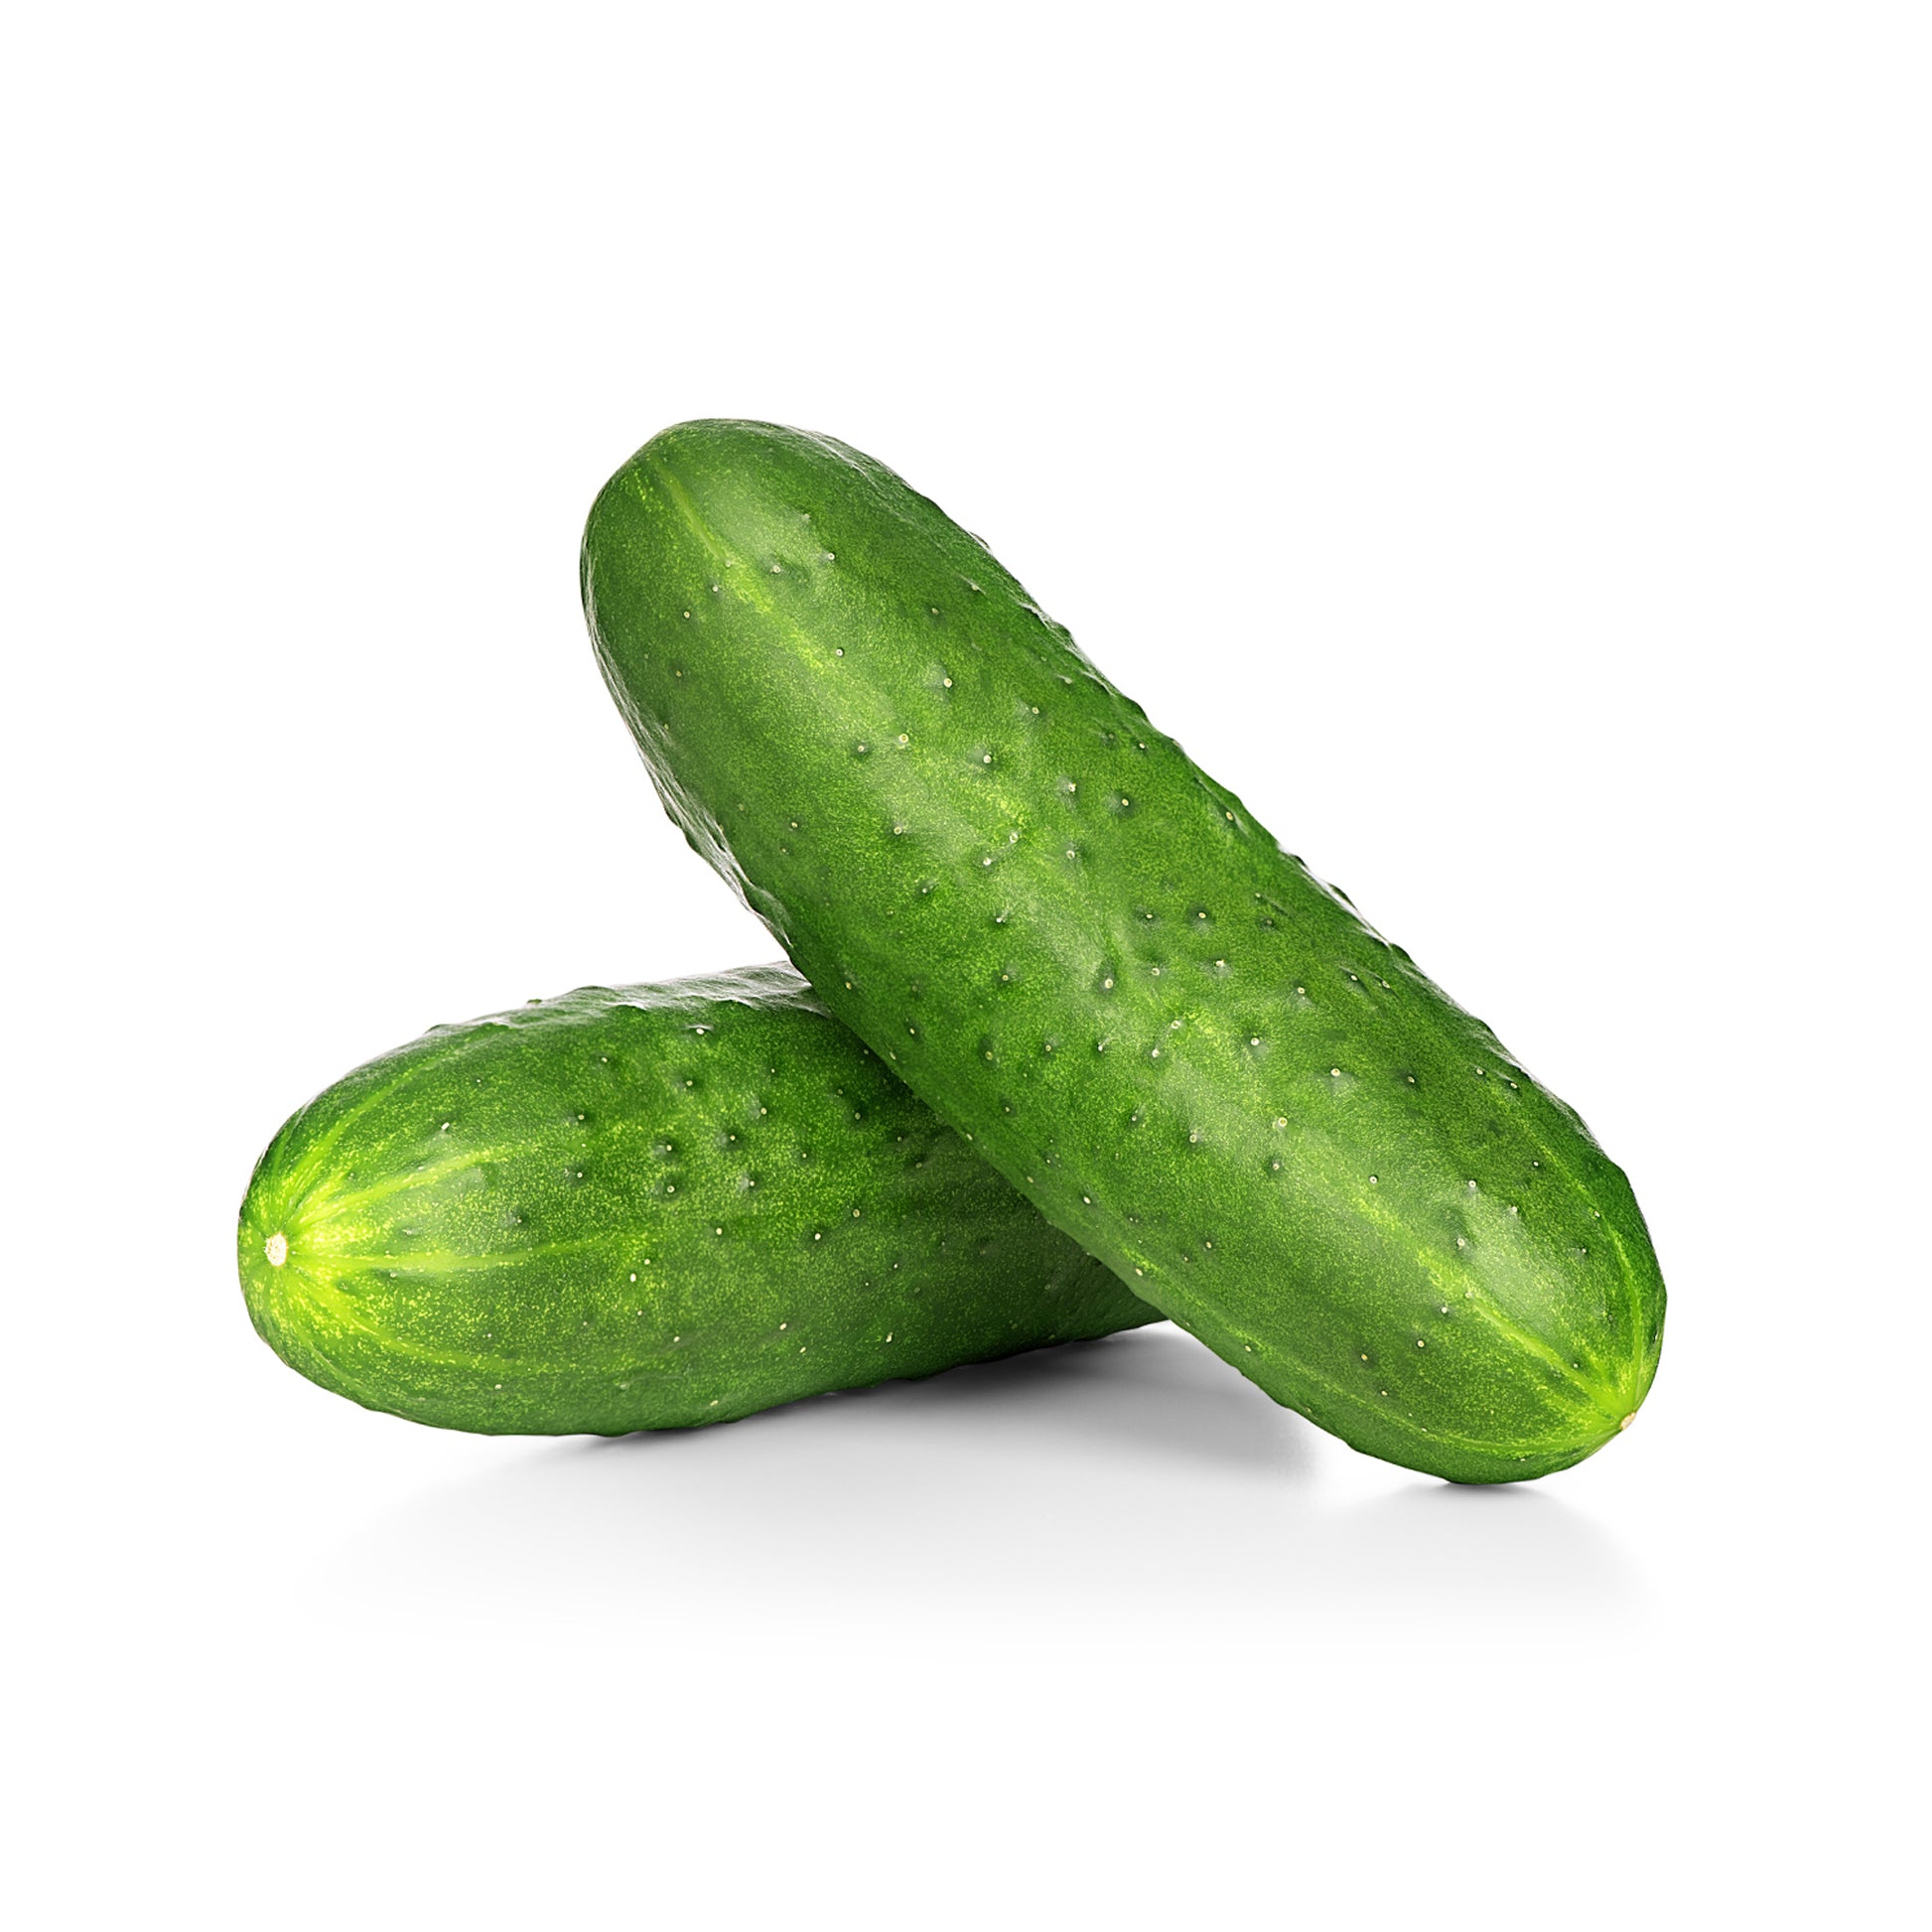 French Cucumber